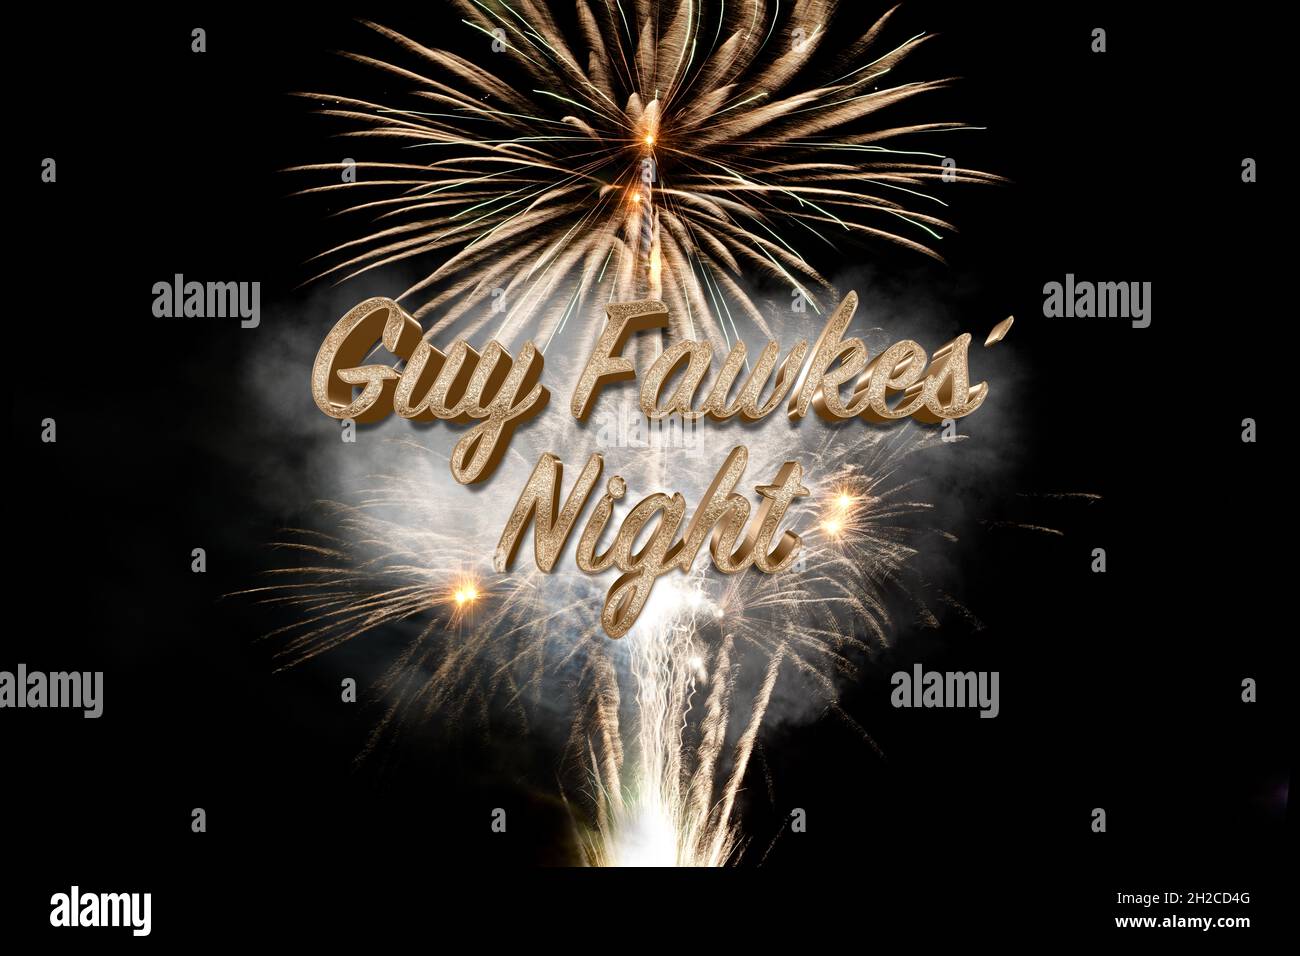 Guy Fawkes Night fireworks display card or poster design with fiery bursting rockets in a night sky and glowing golden text Stock Photo